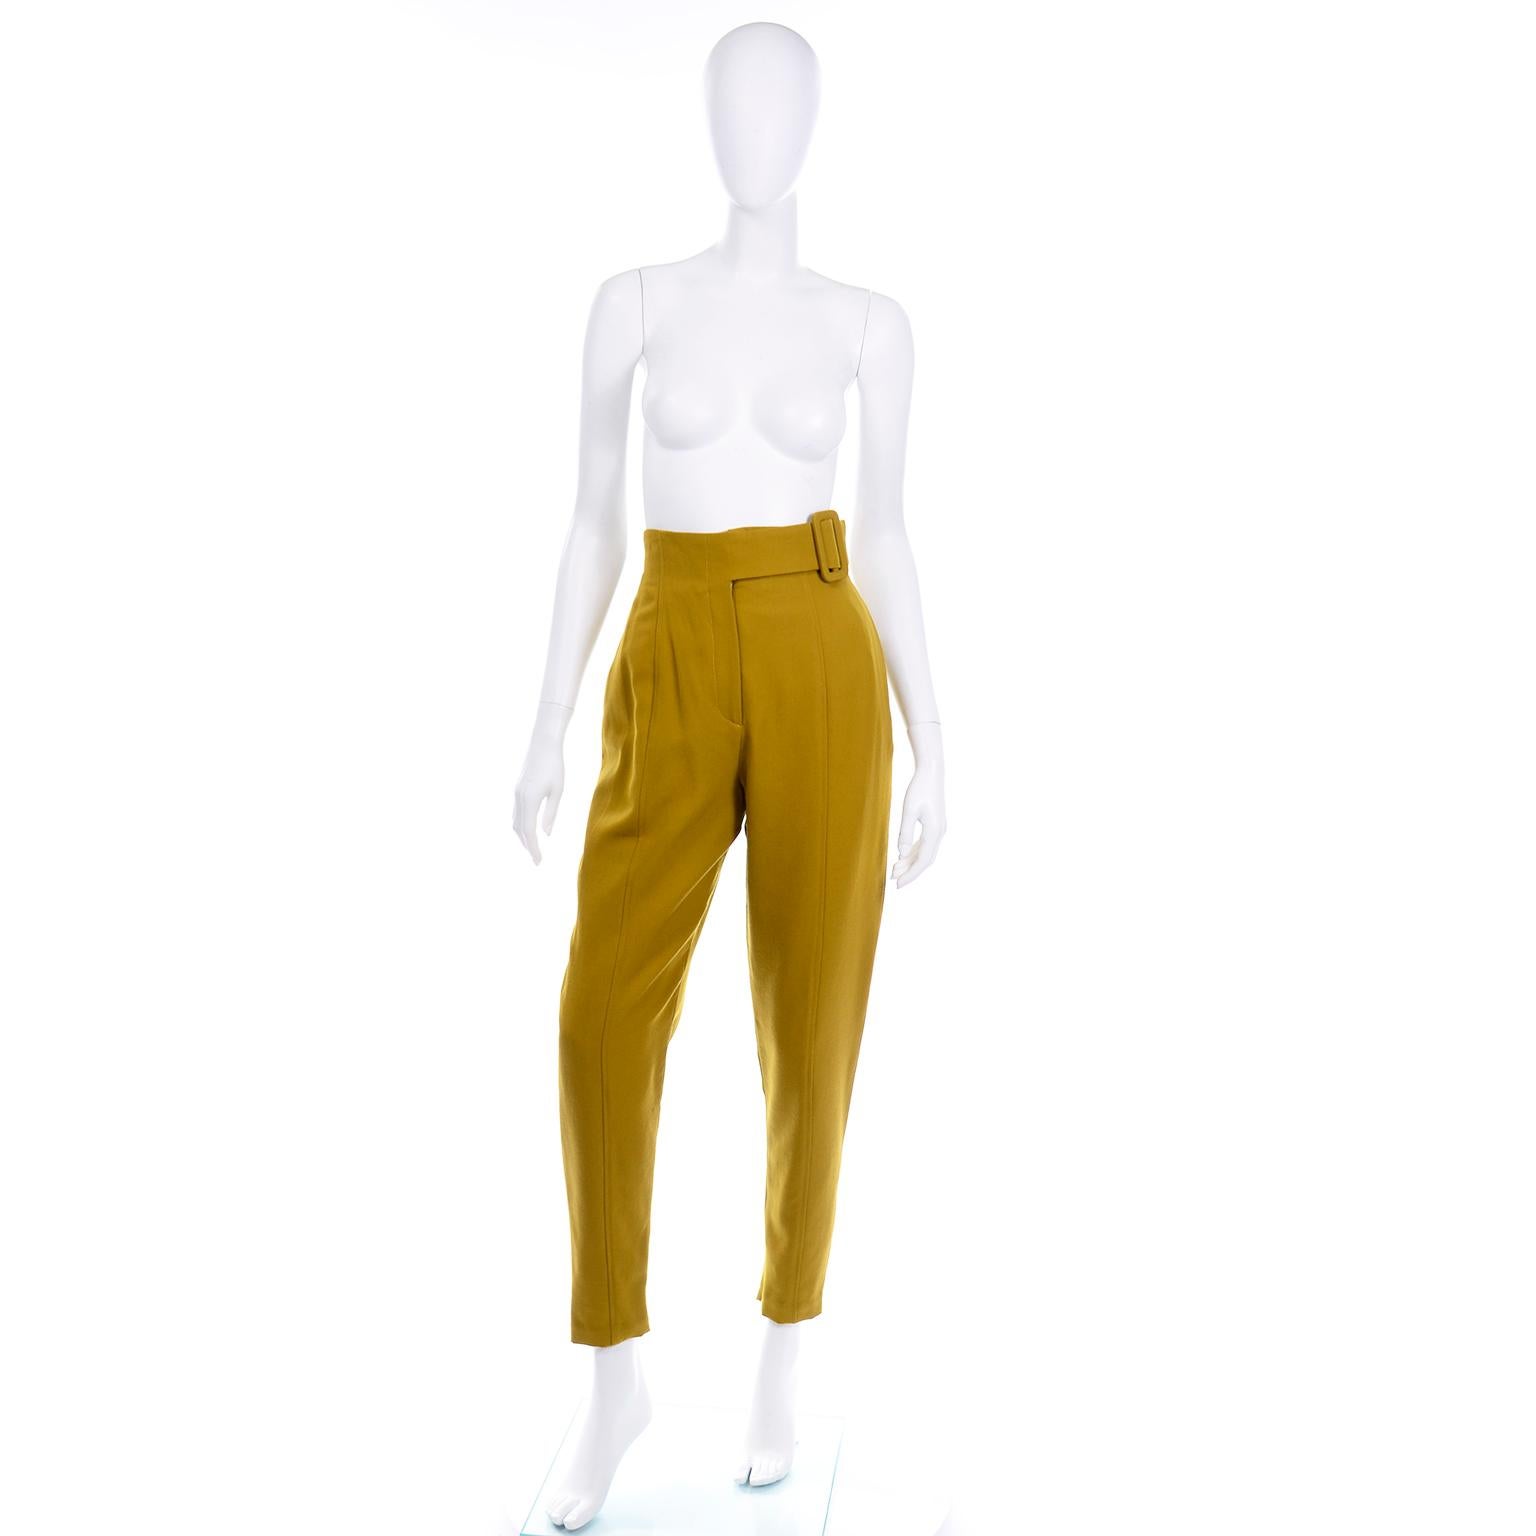 We fell in love with these Incredible mustard high waisted wool trousers with a faux side waist belt. The belt is attached to the waistband and is secured with hook and eye closures on the side of the waist. The pants are also secured with a flat